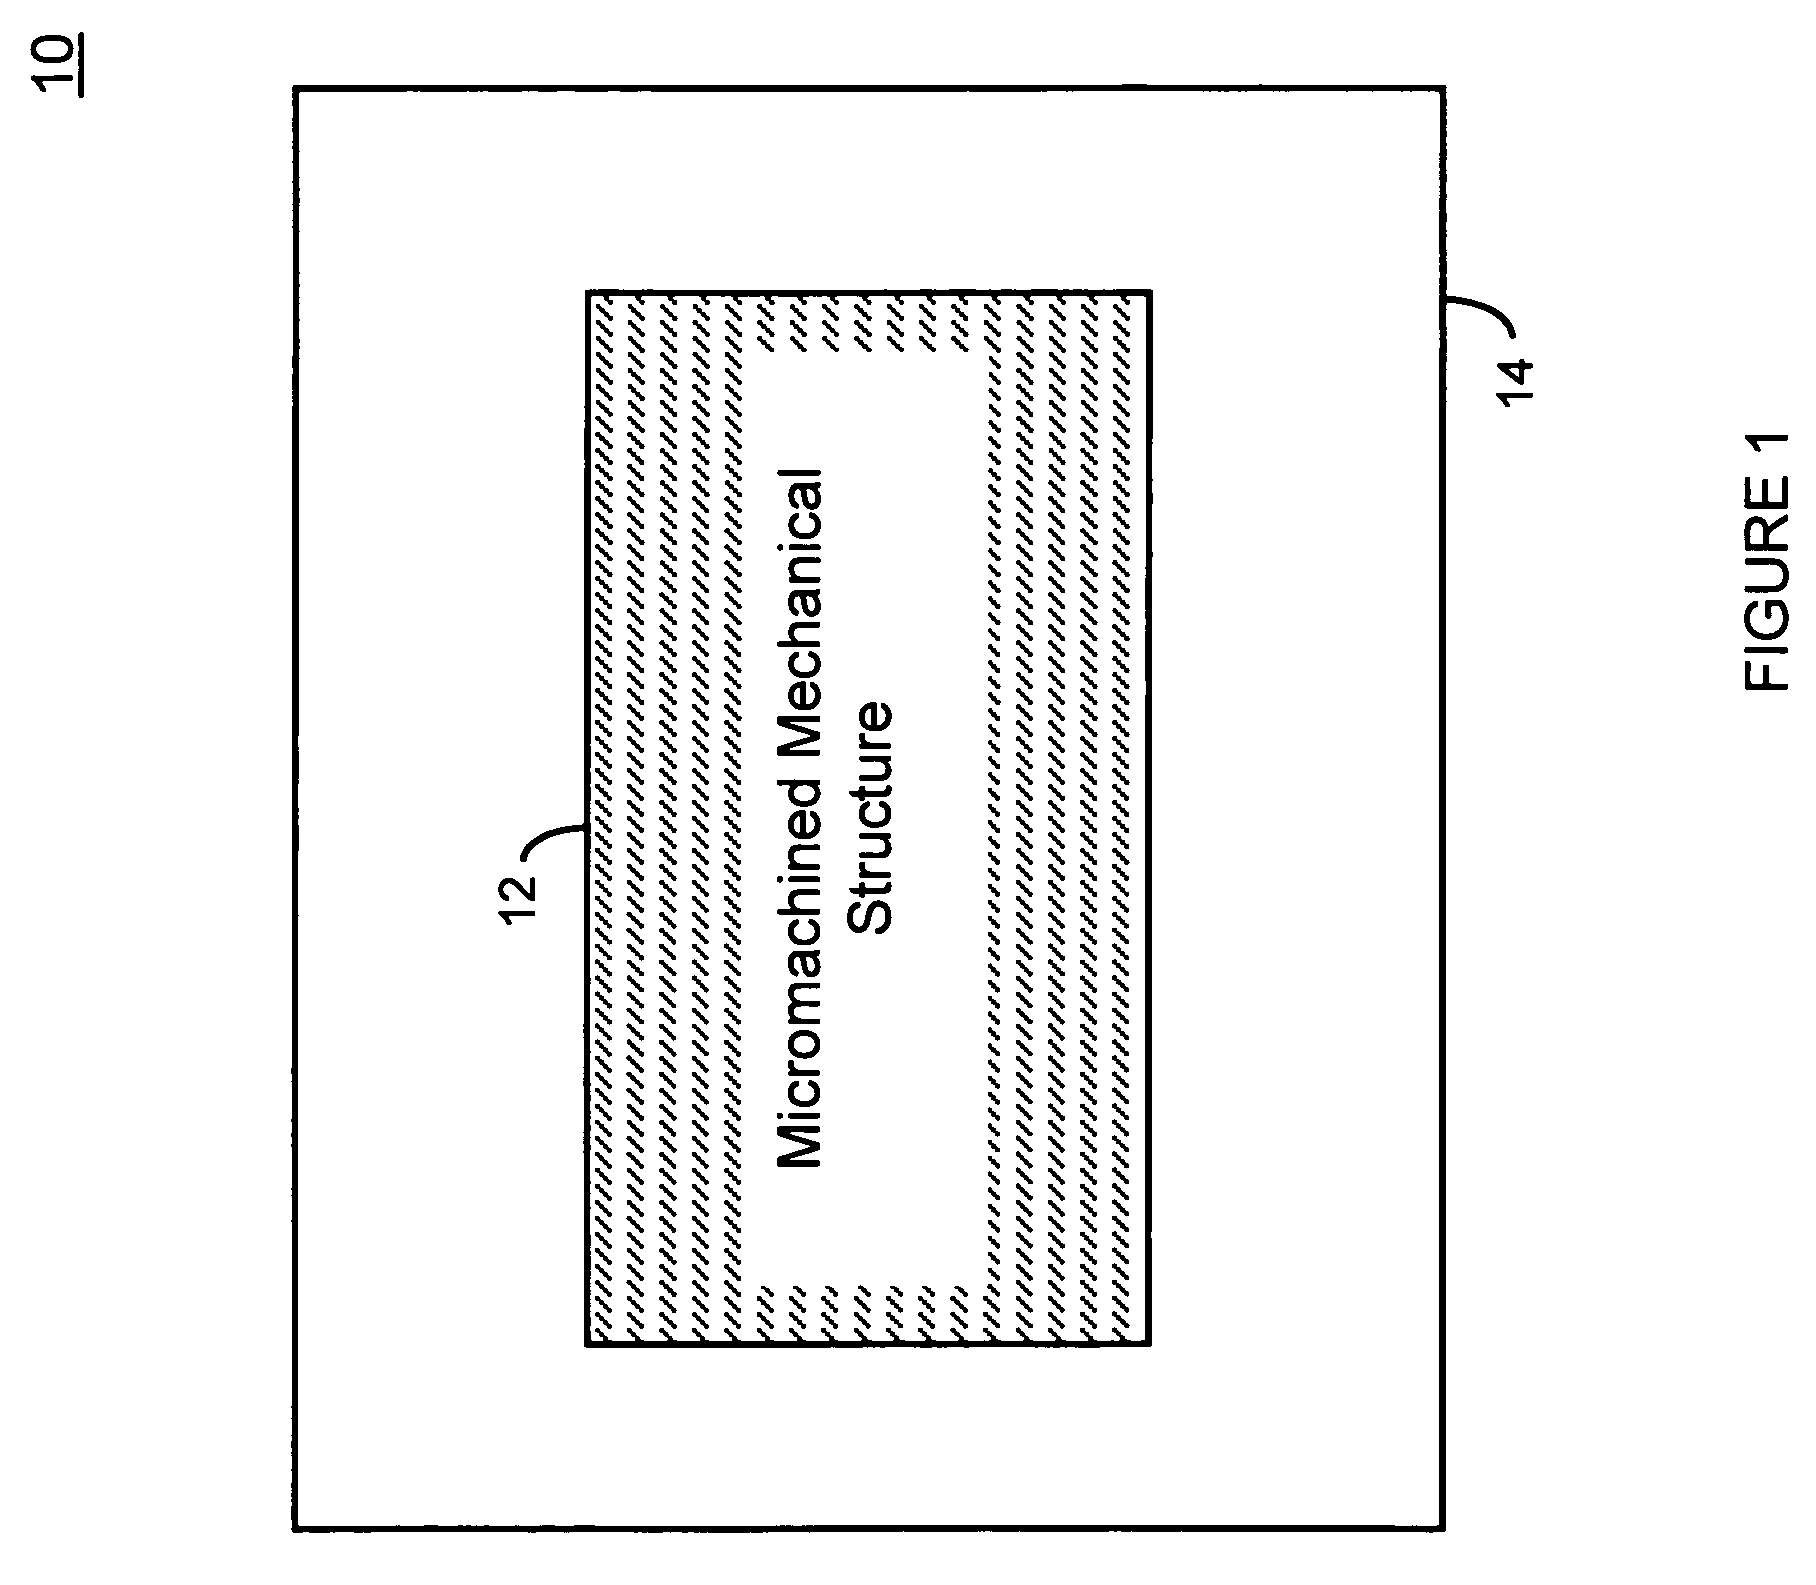 Microelectromechanical systems having stored charge and methods for fabricating and using same